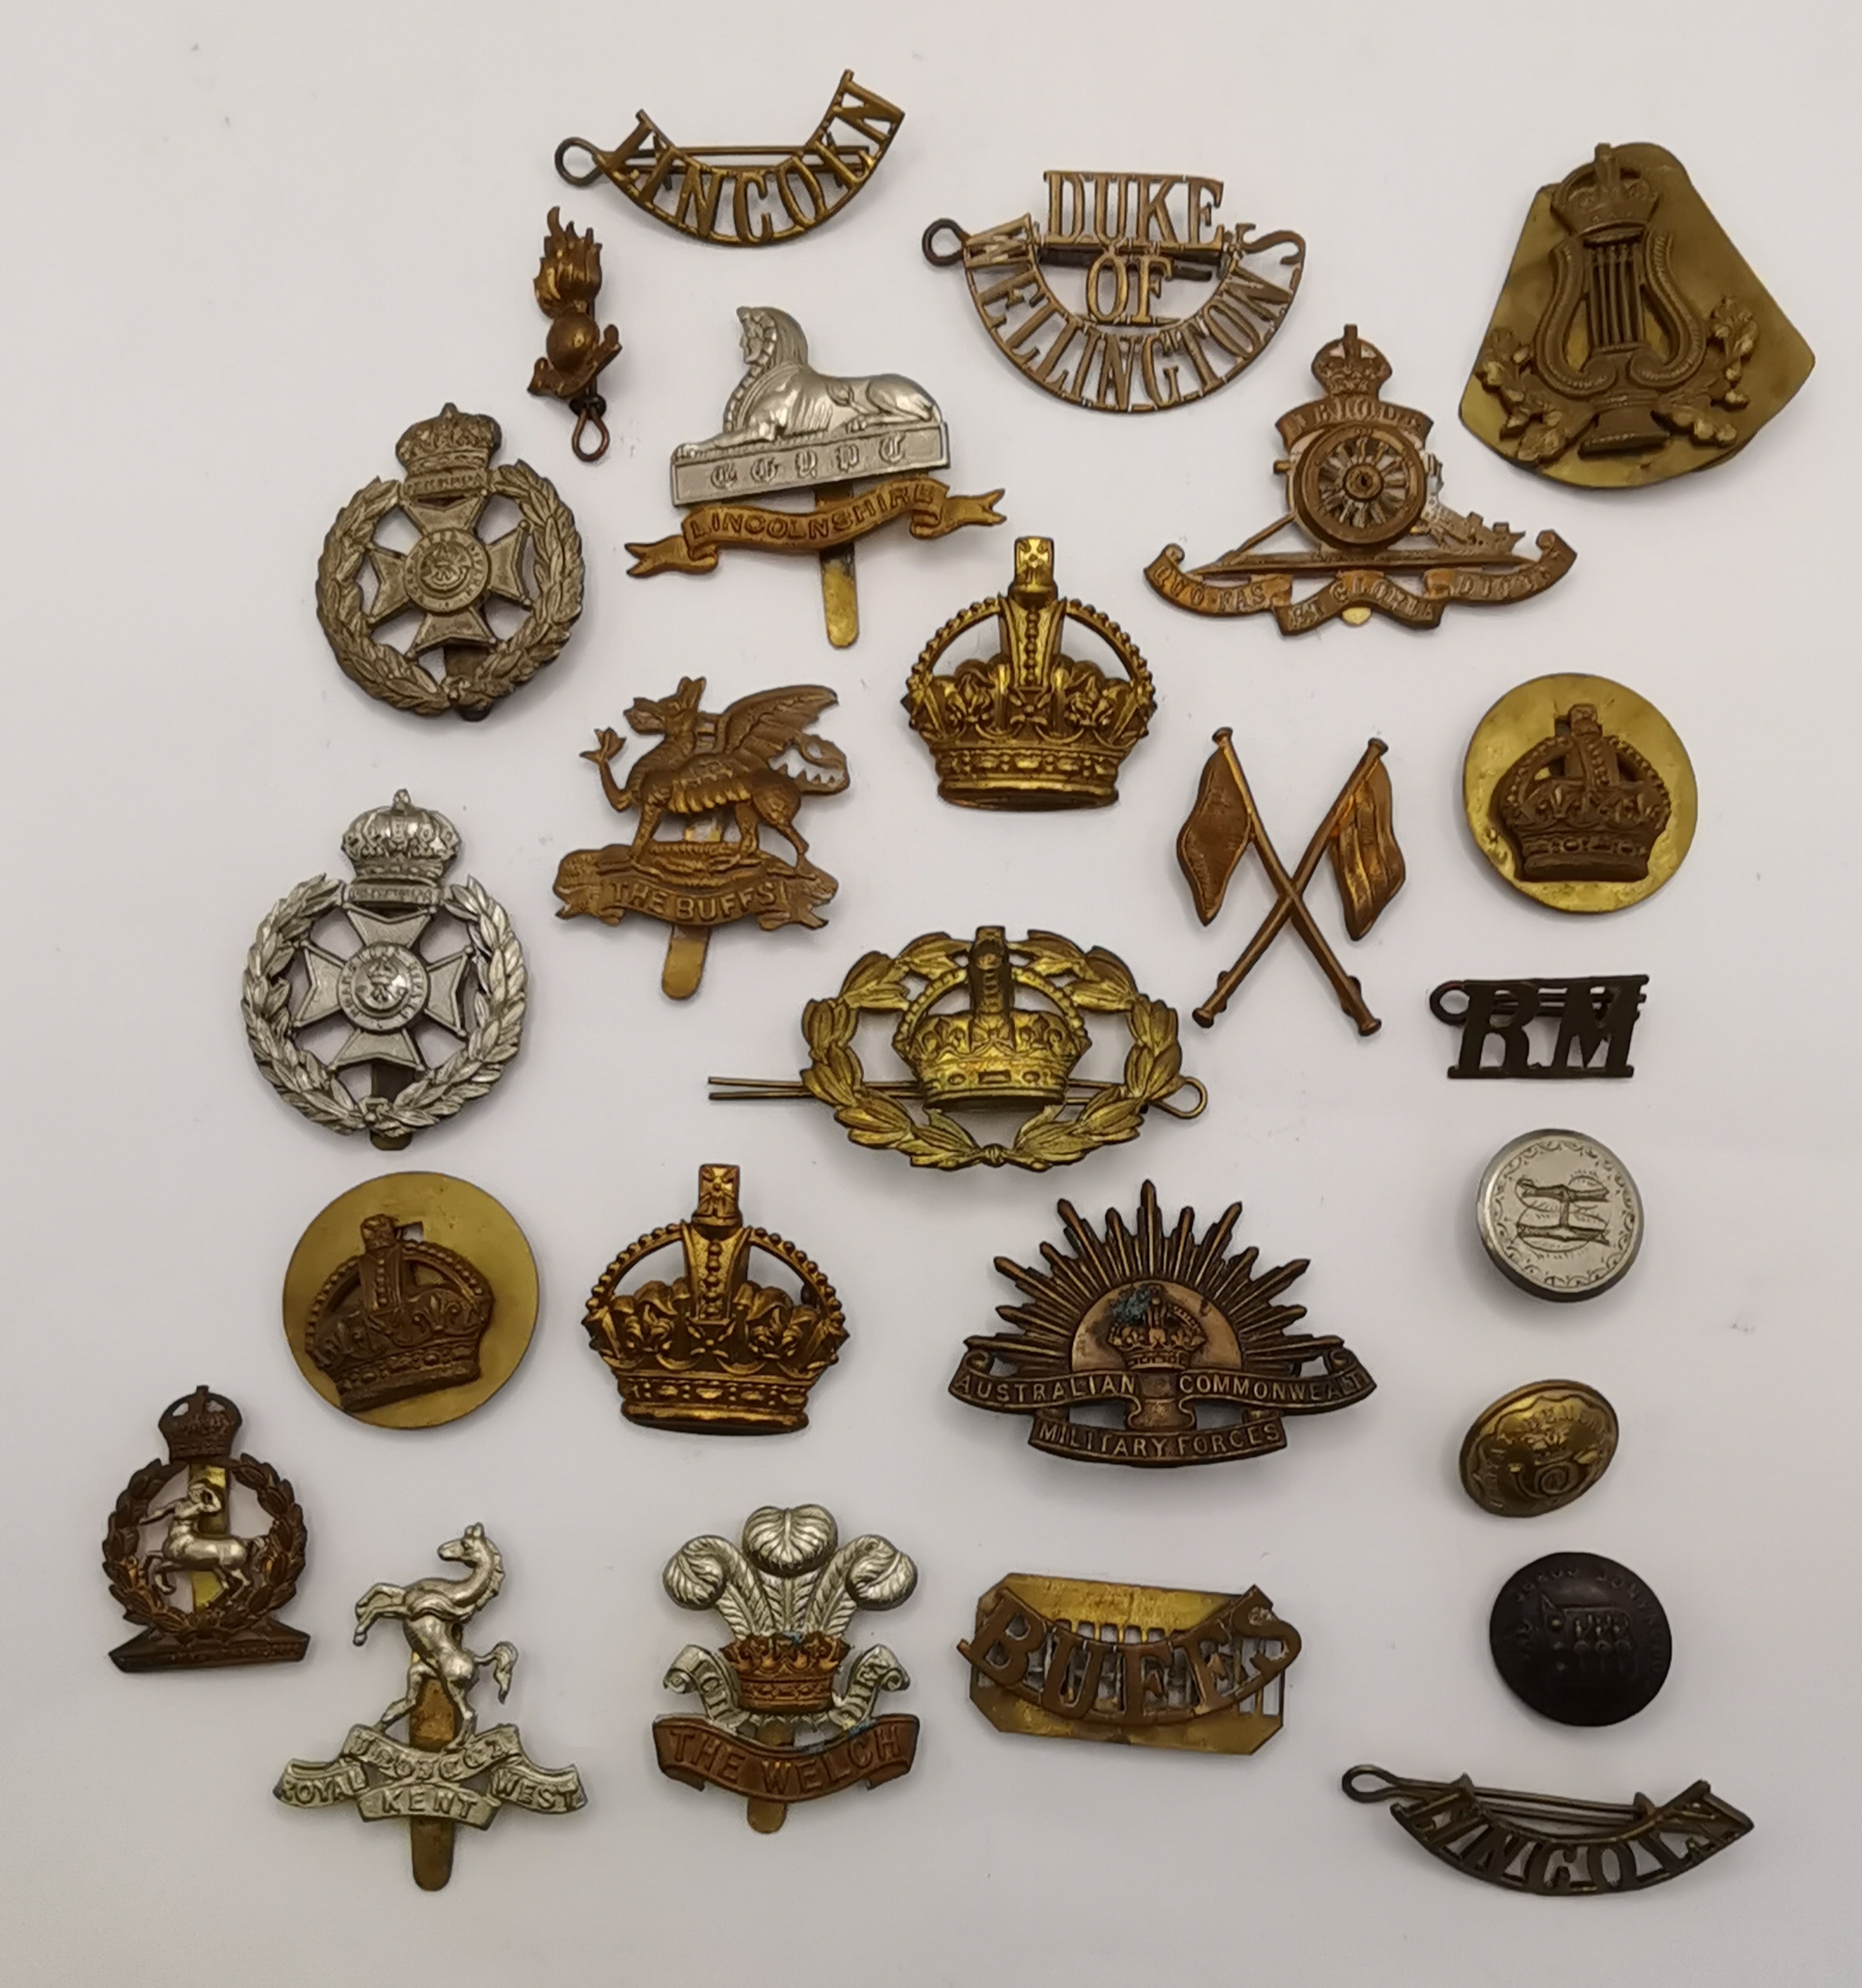 Militaria: A quantity of cap badges, shoulder titles and buttons, British and Commonwealth